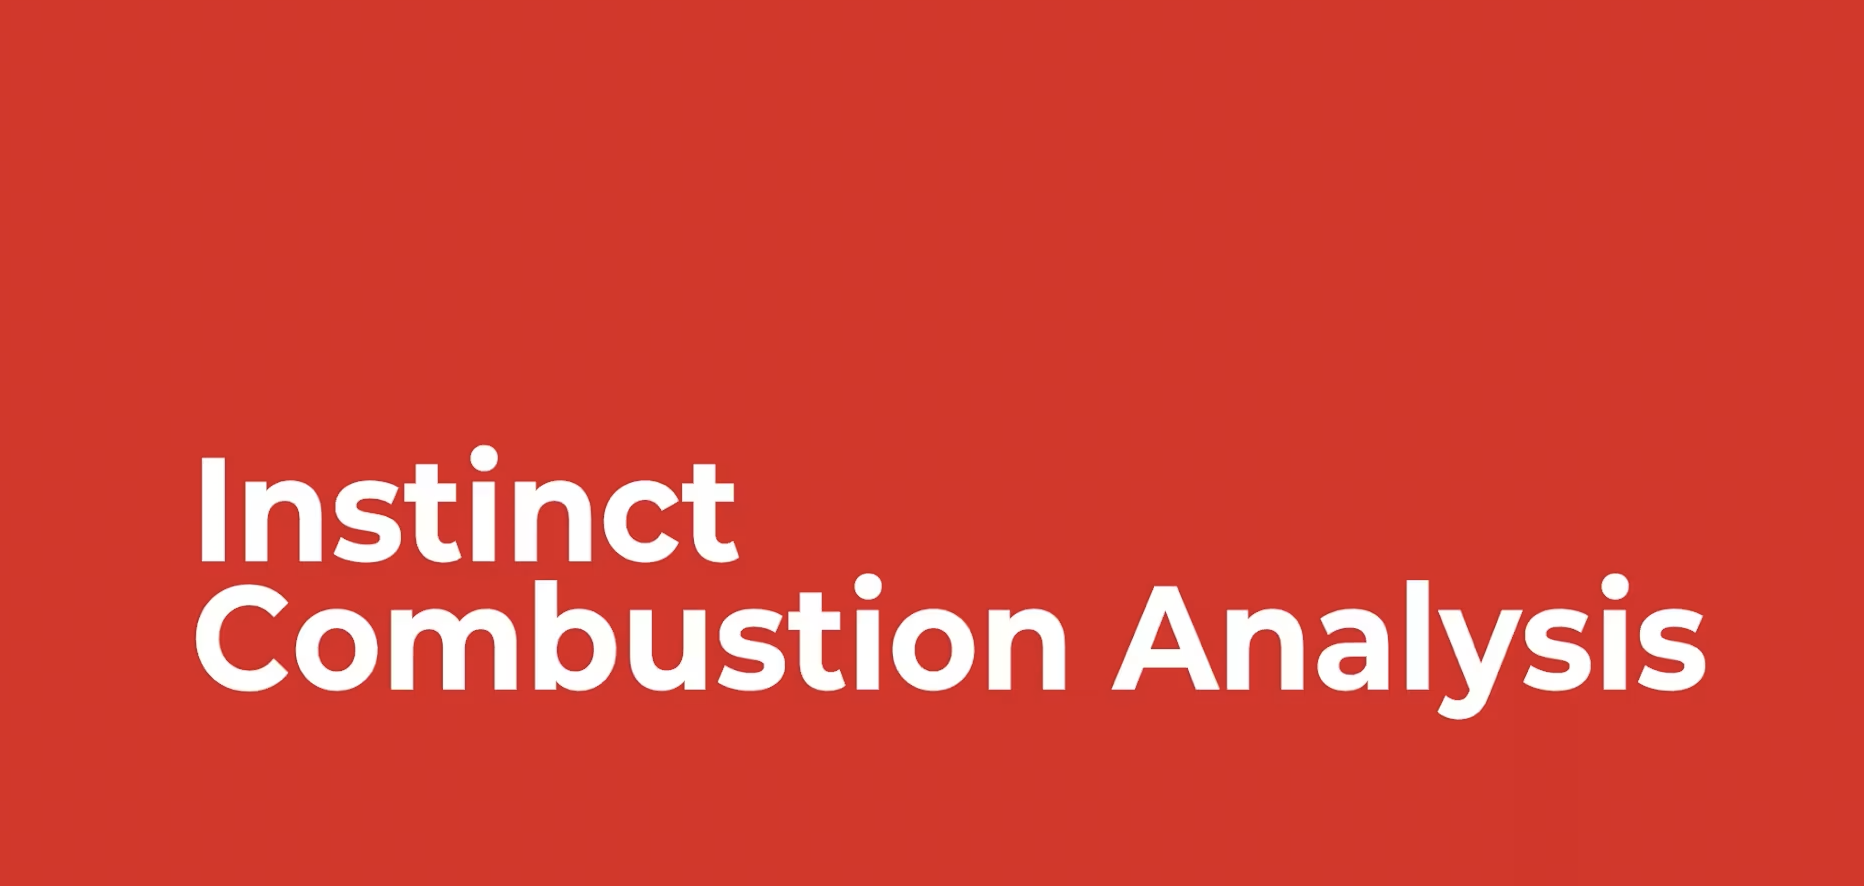 How To: Instinct Combustion Analysis